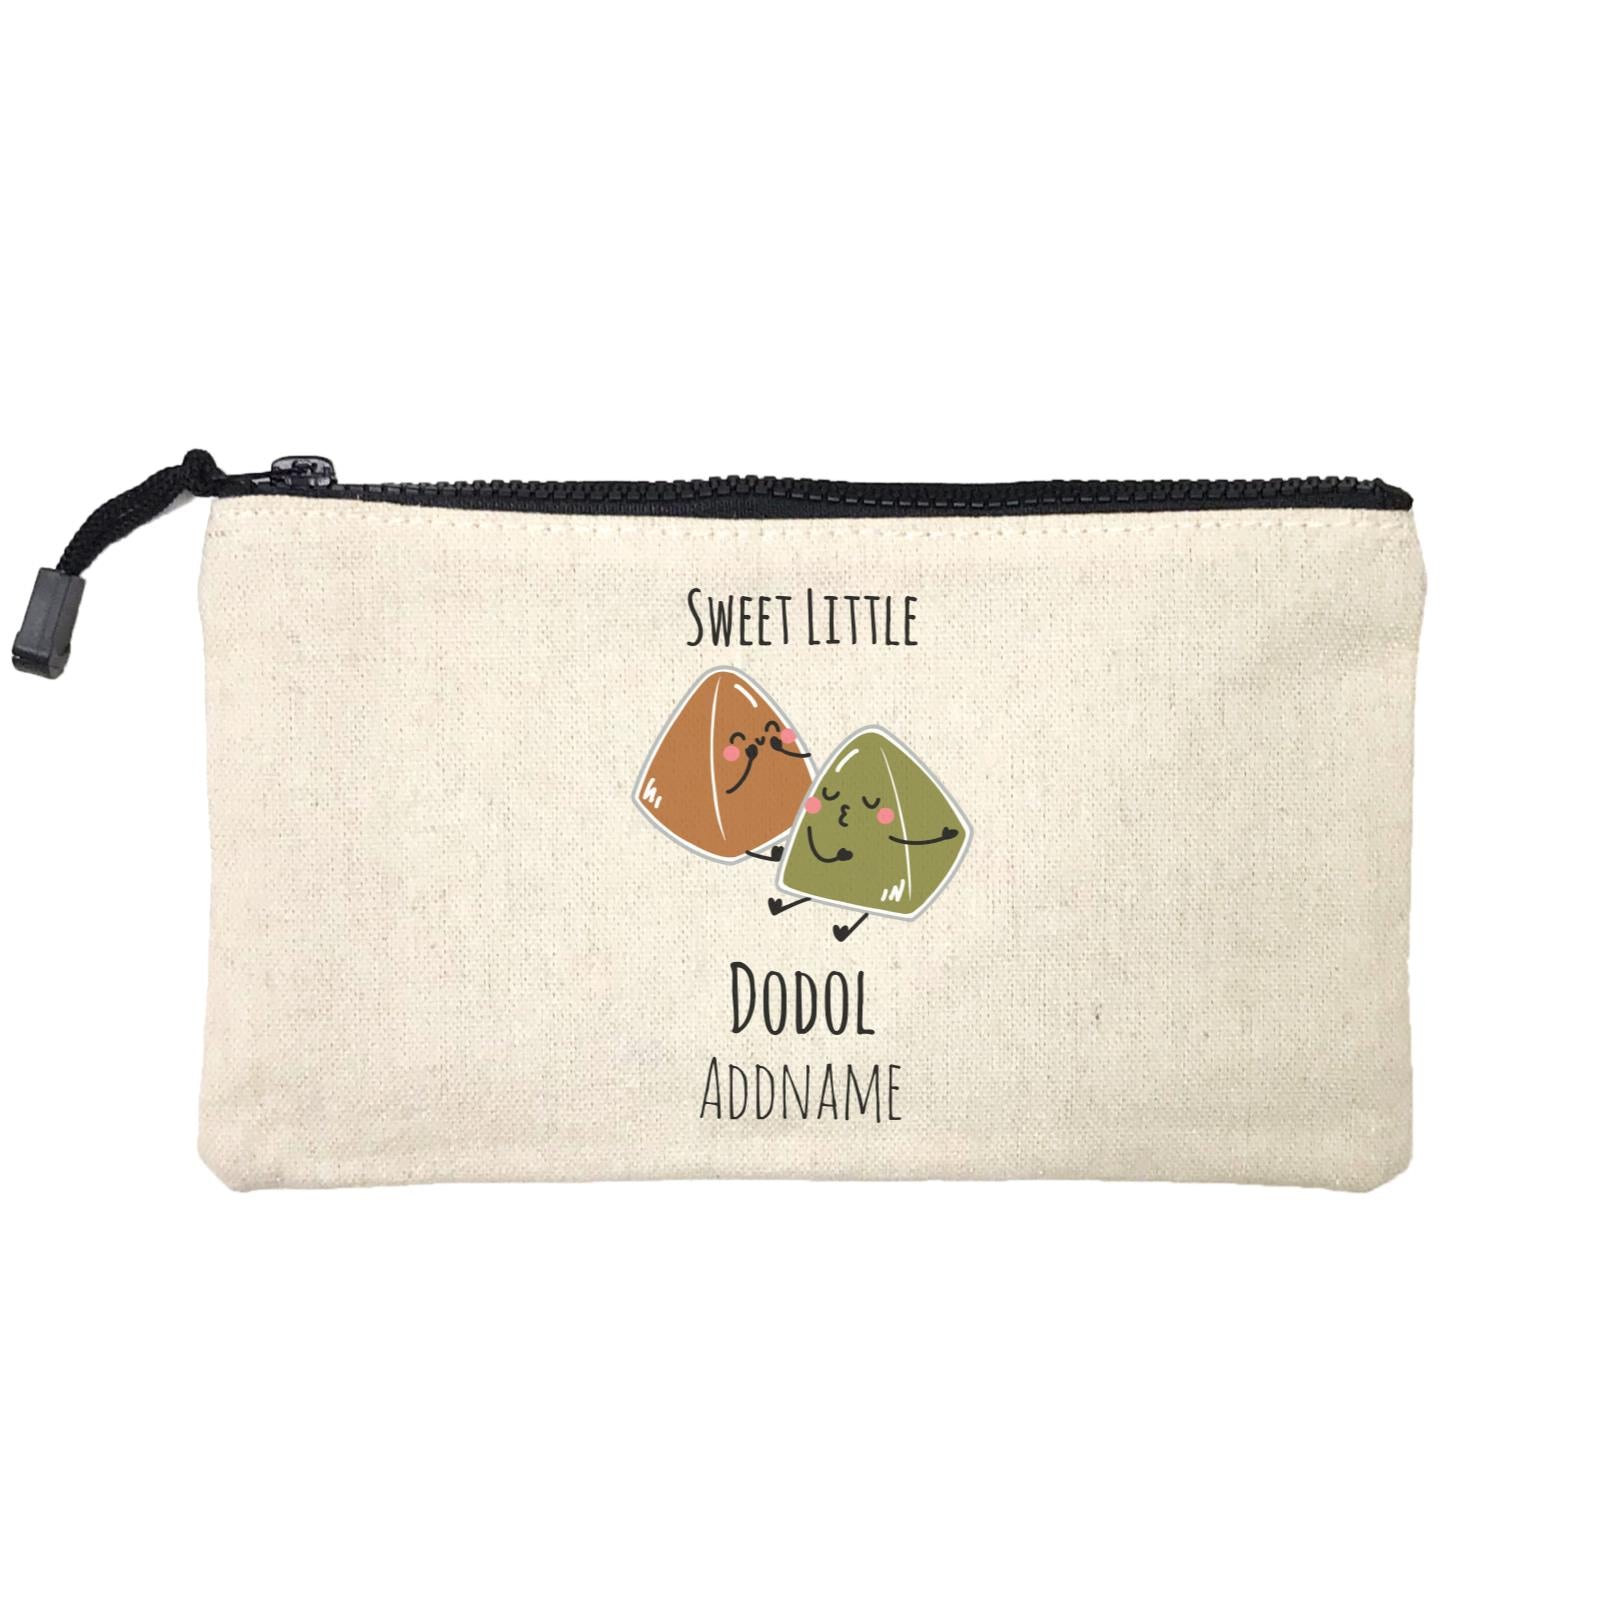 Raya Kuih Sweet 1 Sweet Little Dodol Addname Mini Accessories Stationery Pouch